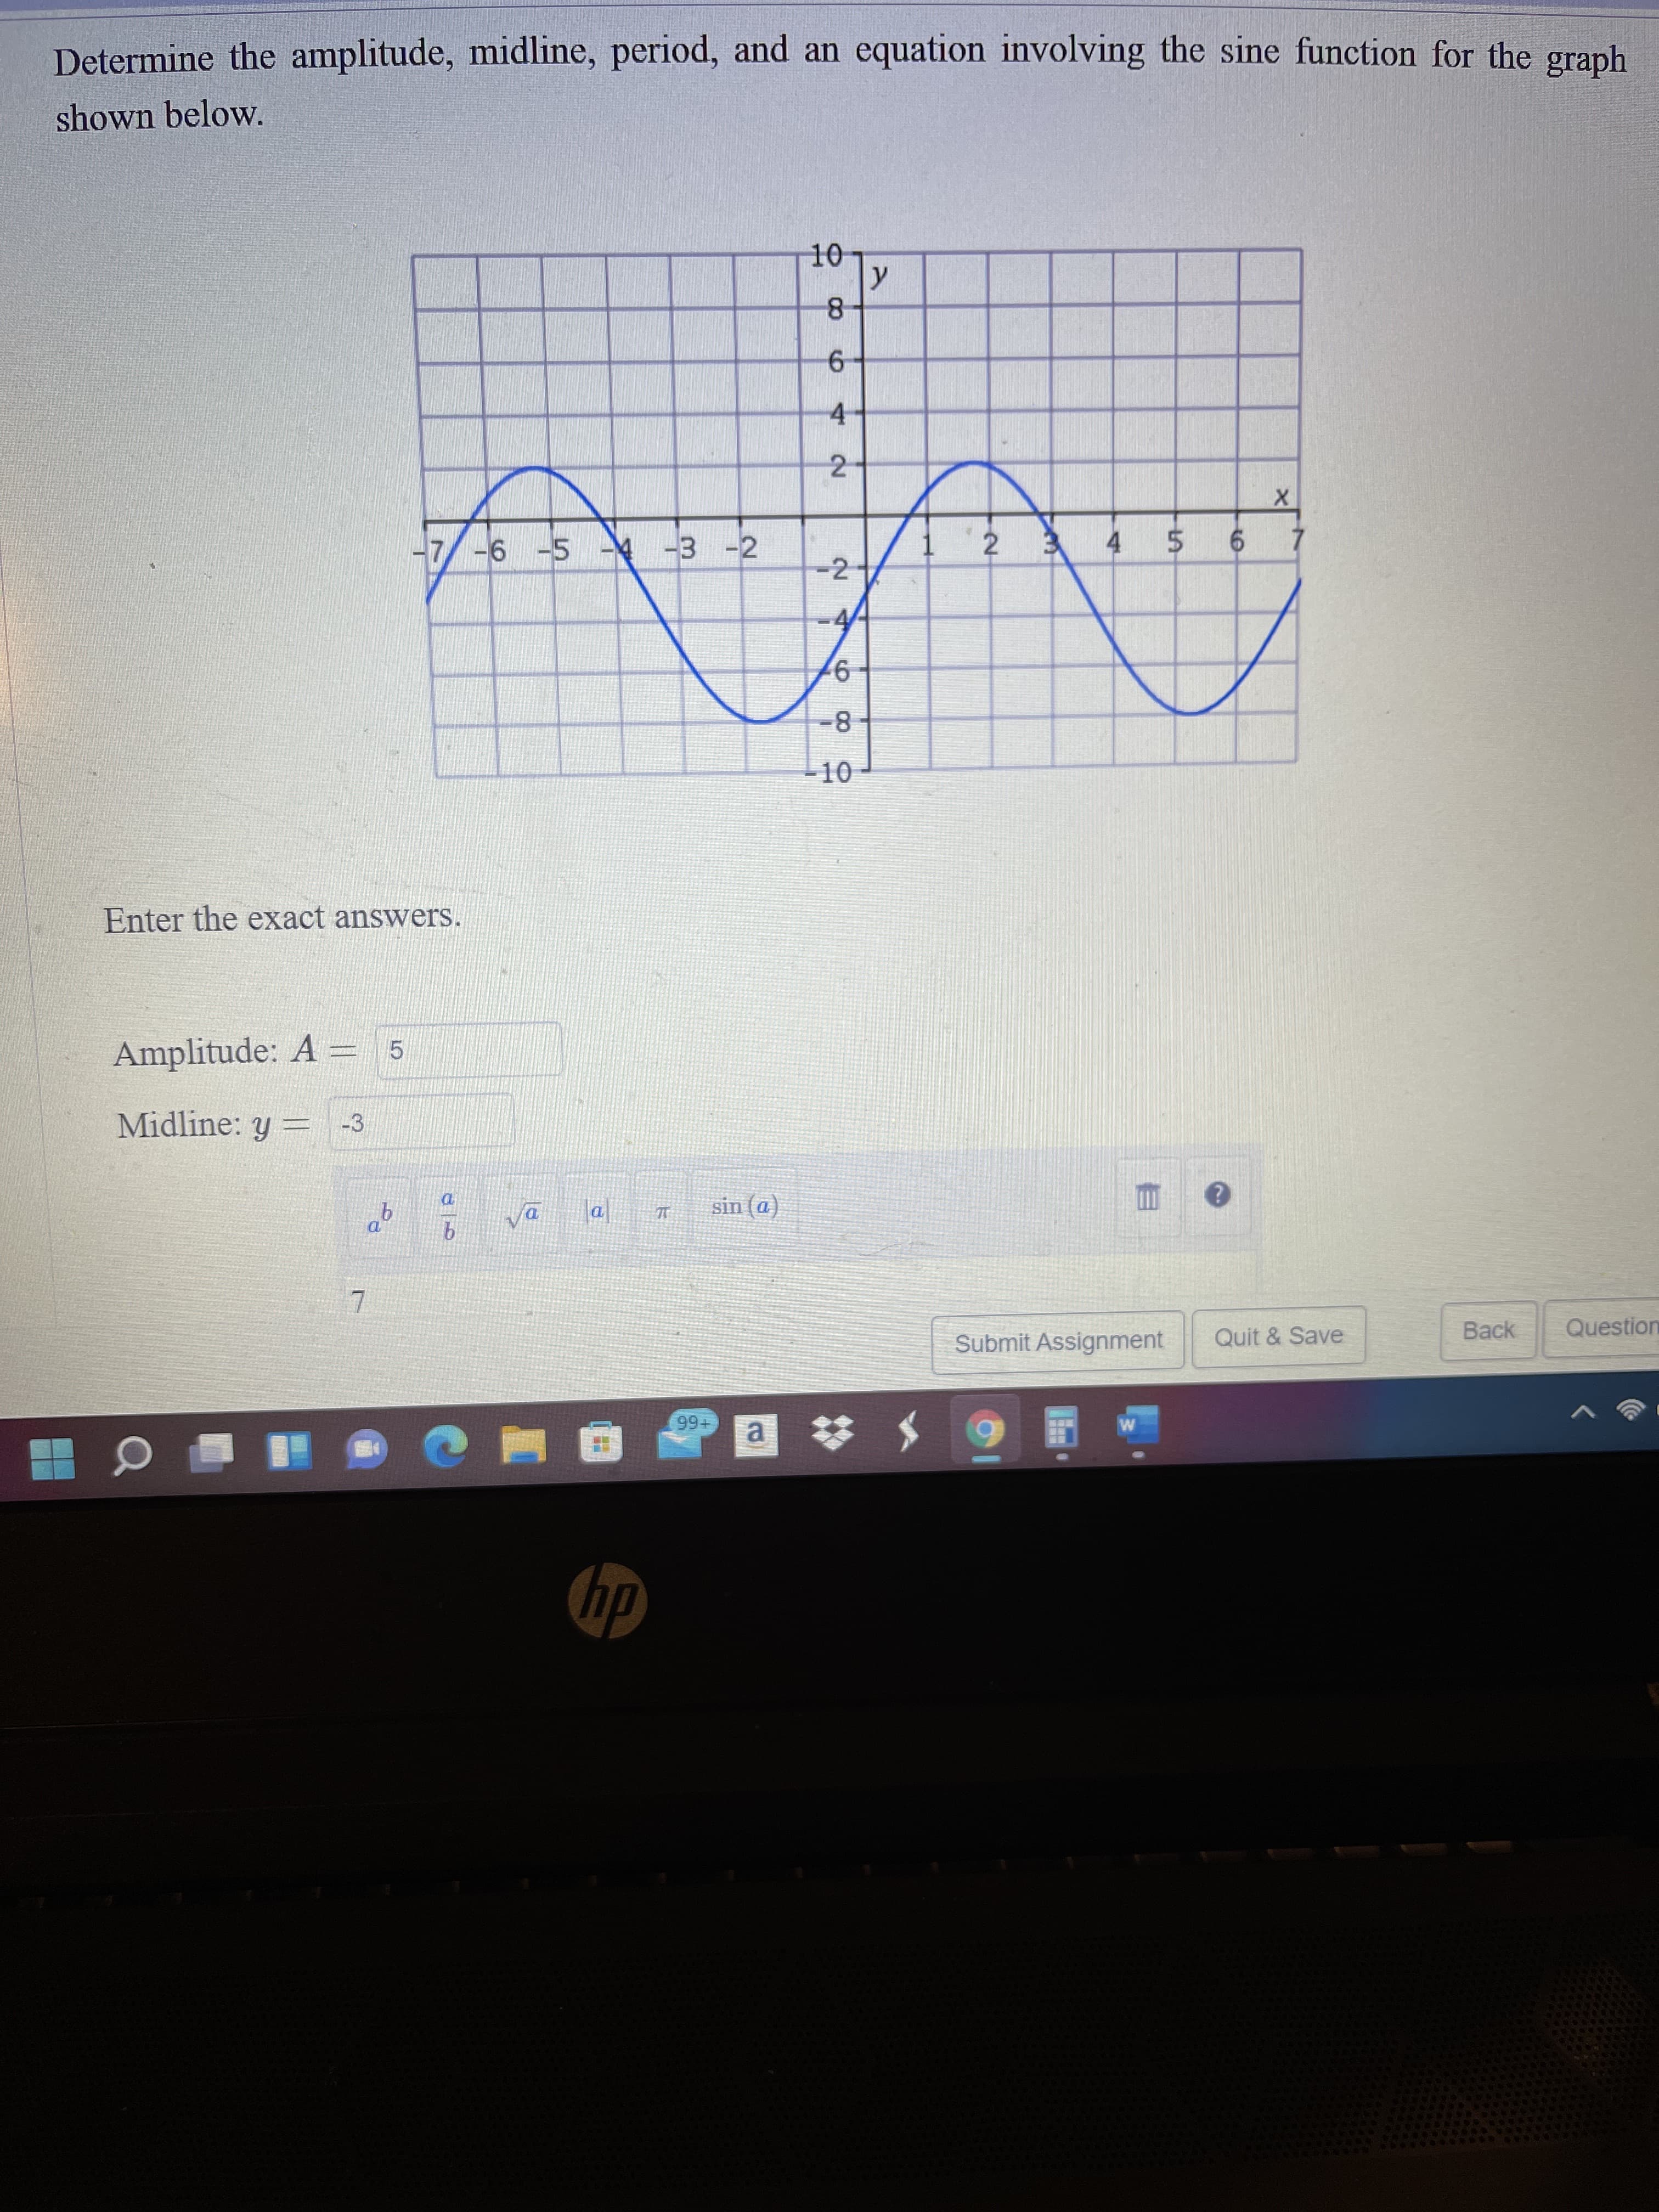 2-
6,
Determine the amplitude, midline, period, and an equation involving the sine function for the graph
shown below.
4.
-7
-6 -5 -4 -3 -2
4 5
-2
7.
8-
-10
Enter the exact answers.
Amplitude: A = 5
Midline: y:
-3
va
sin (a)
Submit Assignment
Quit & Save
Back
Question
+66
a.
hp
